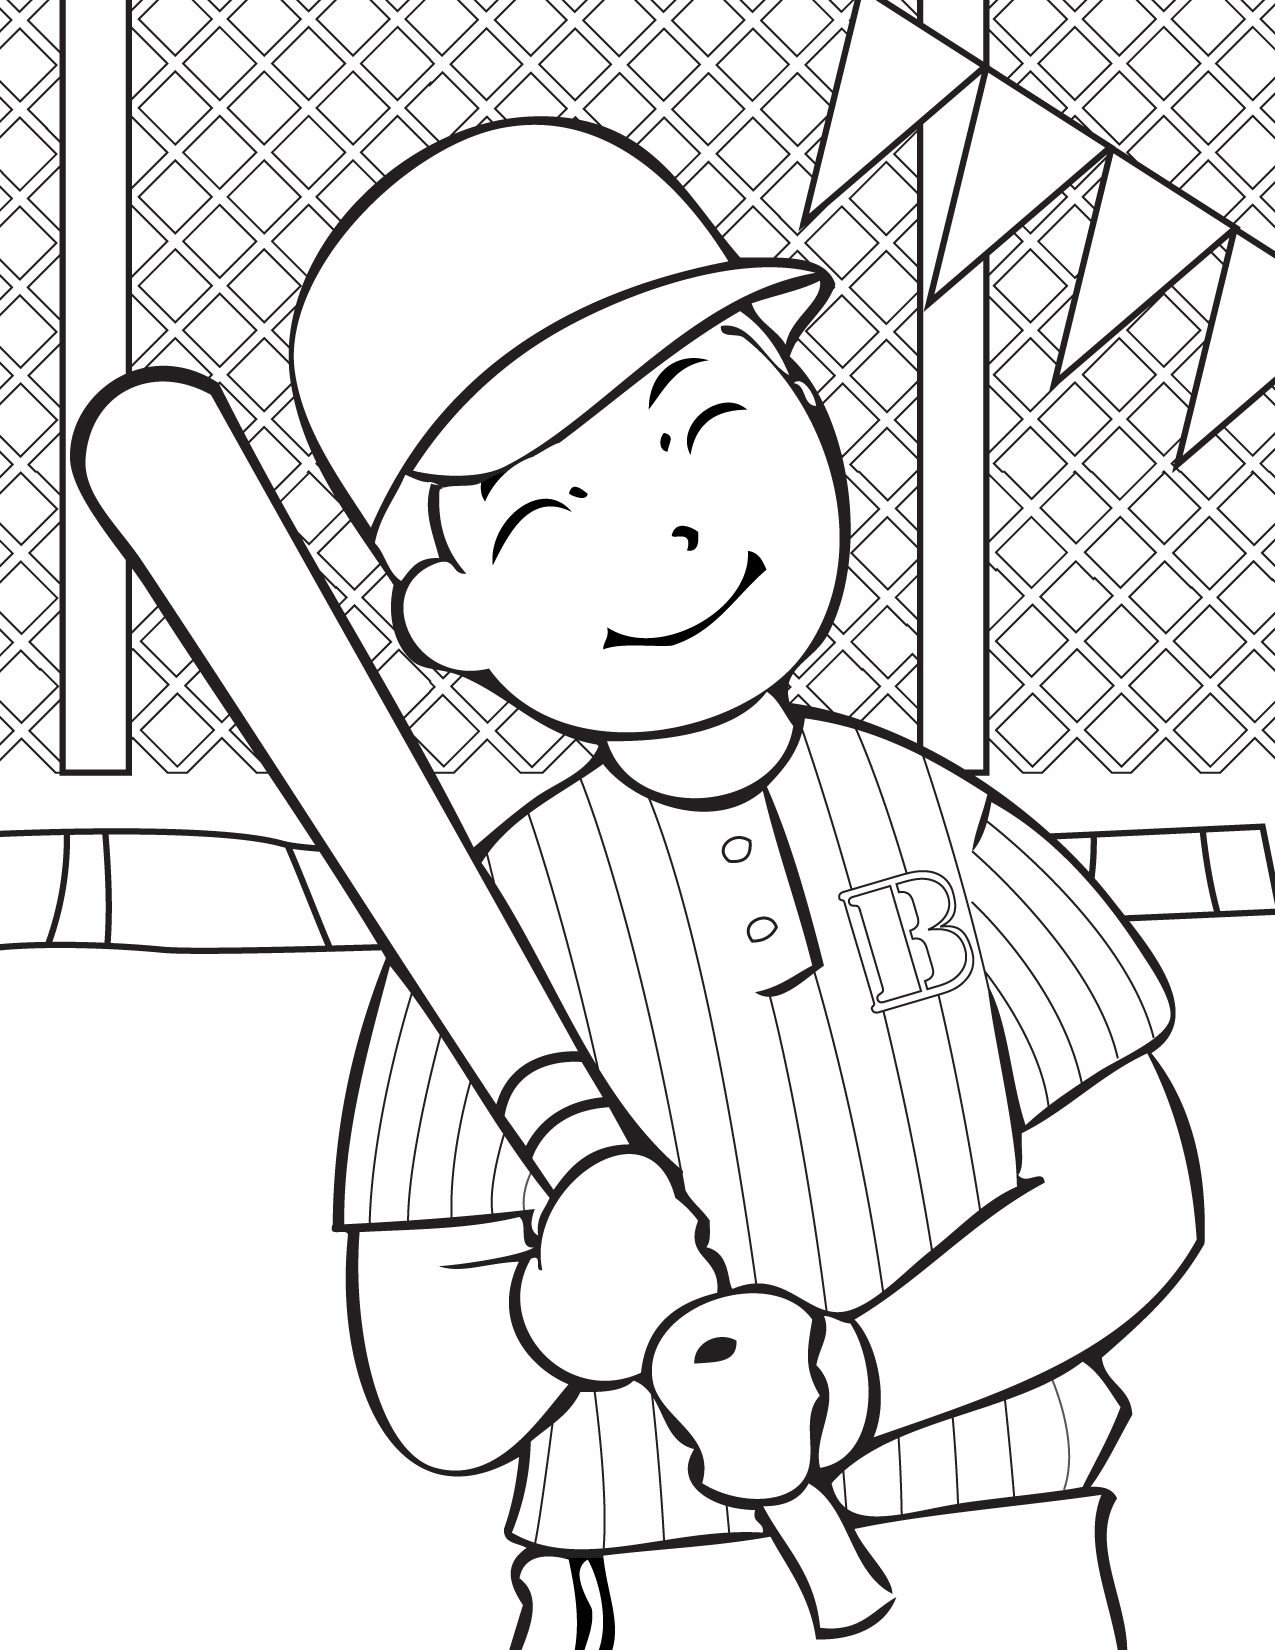 free-printable-baseball-coloring-pages-for-kids-best-coloring-pages